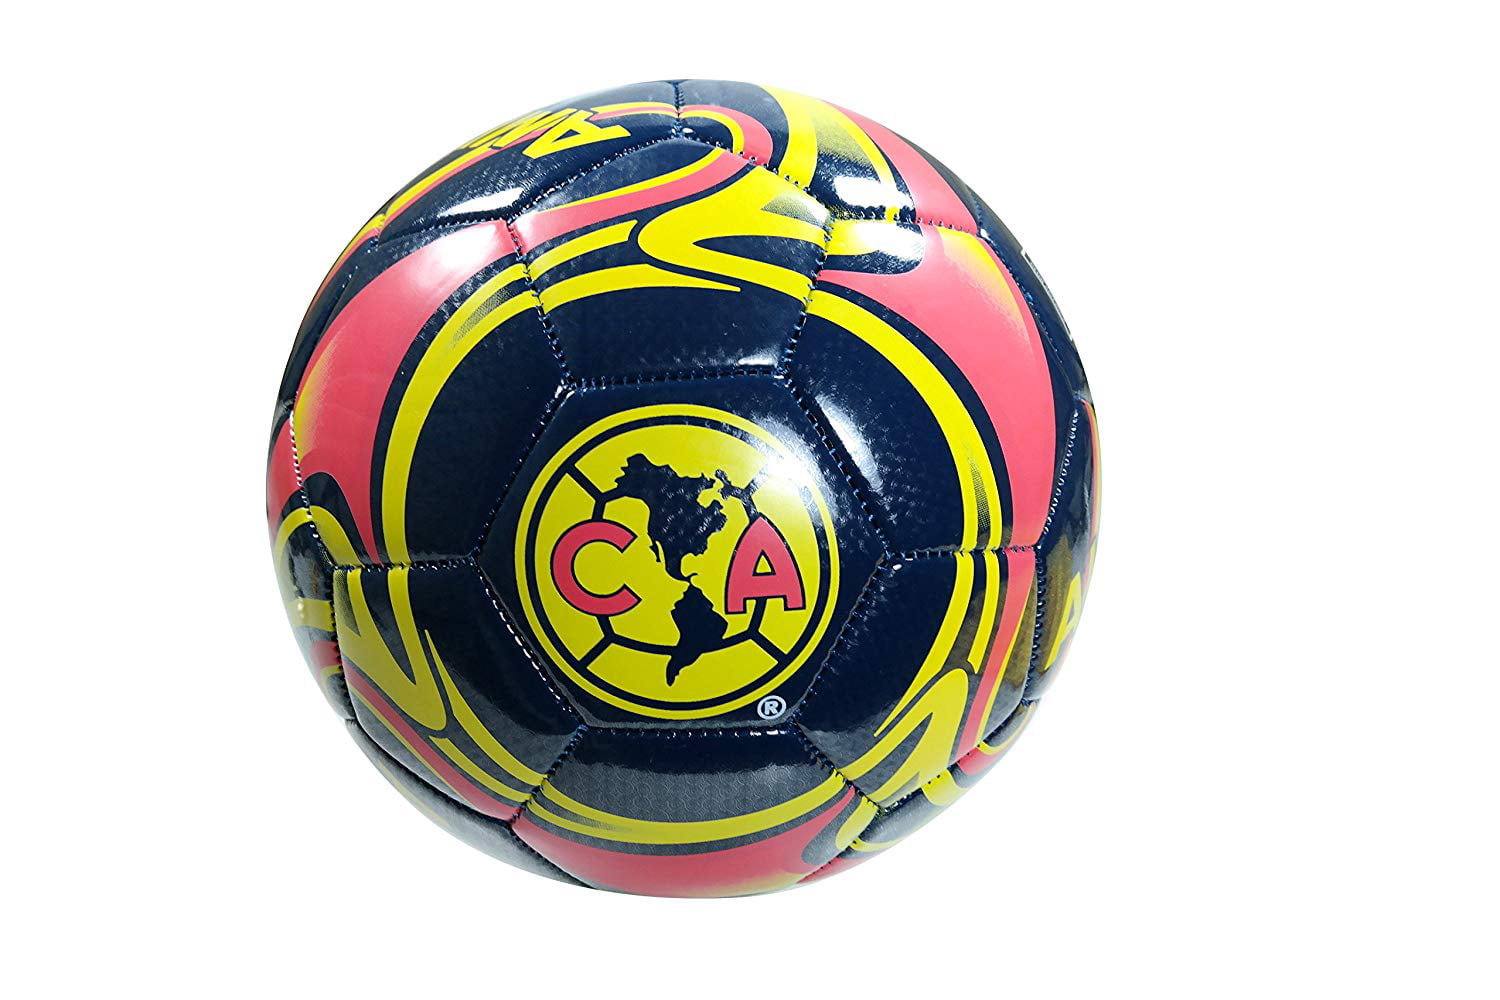 Club America Authentic Official Licensed Soccer Ball Size 4-02-3 